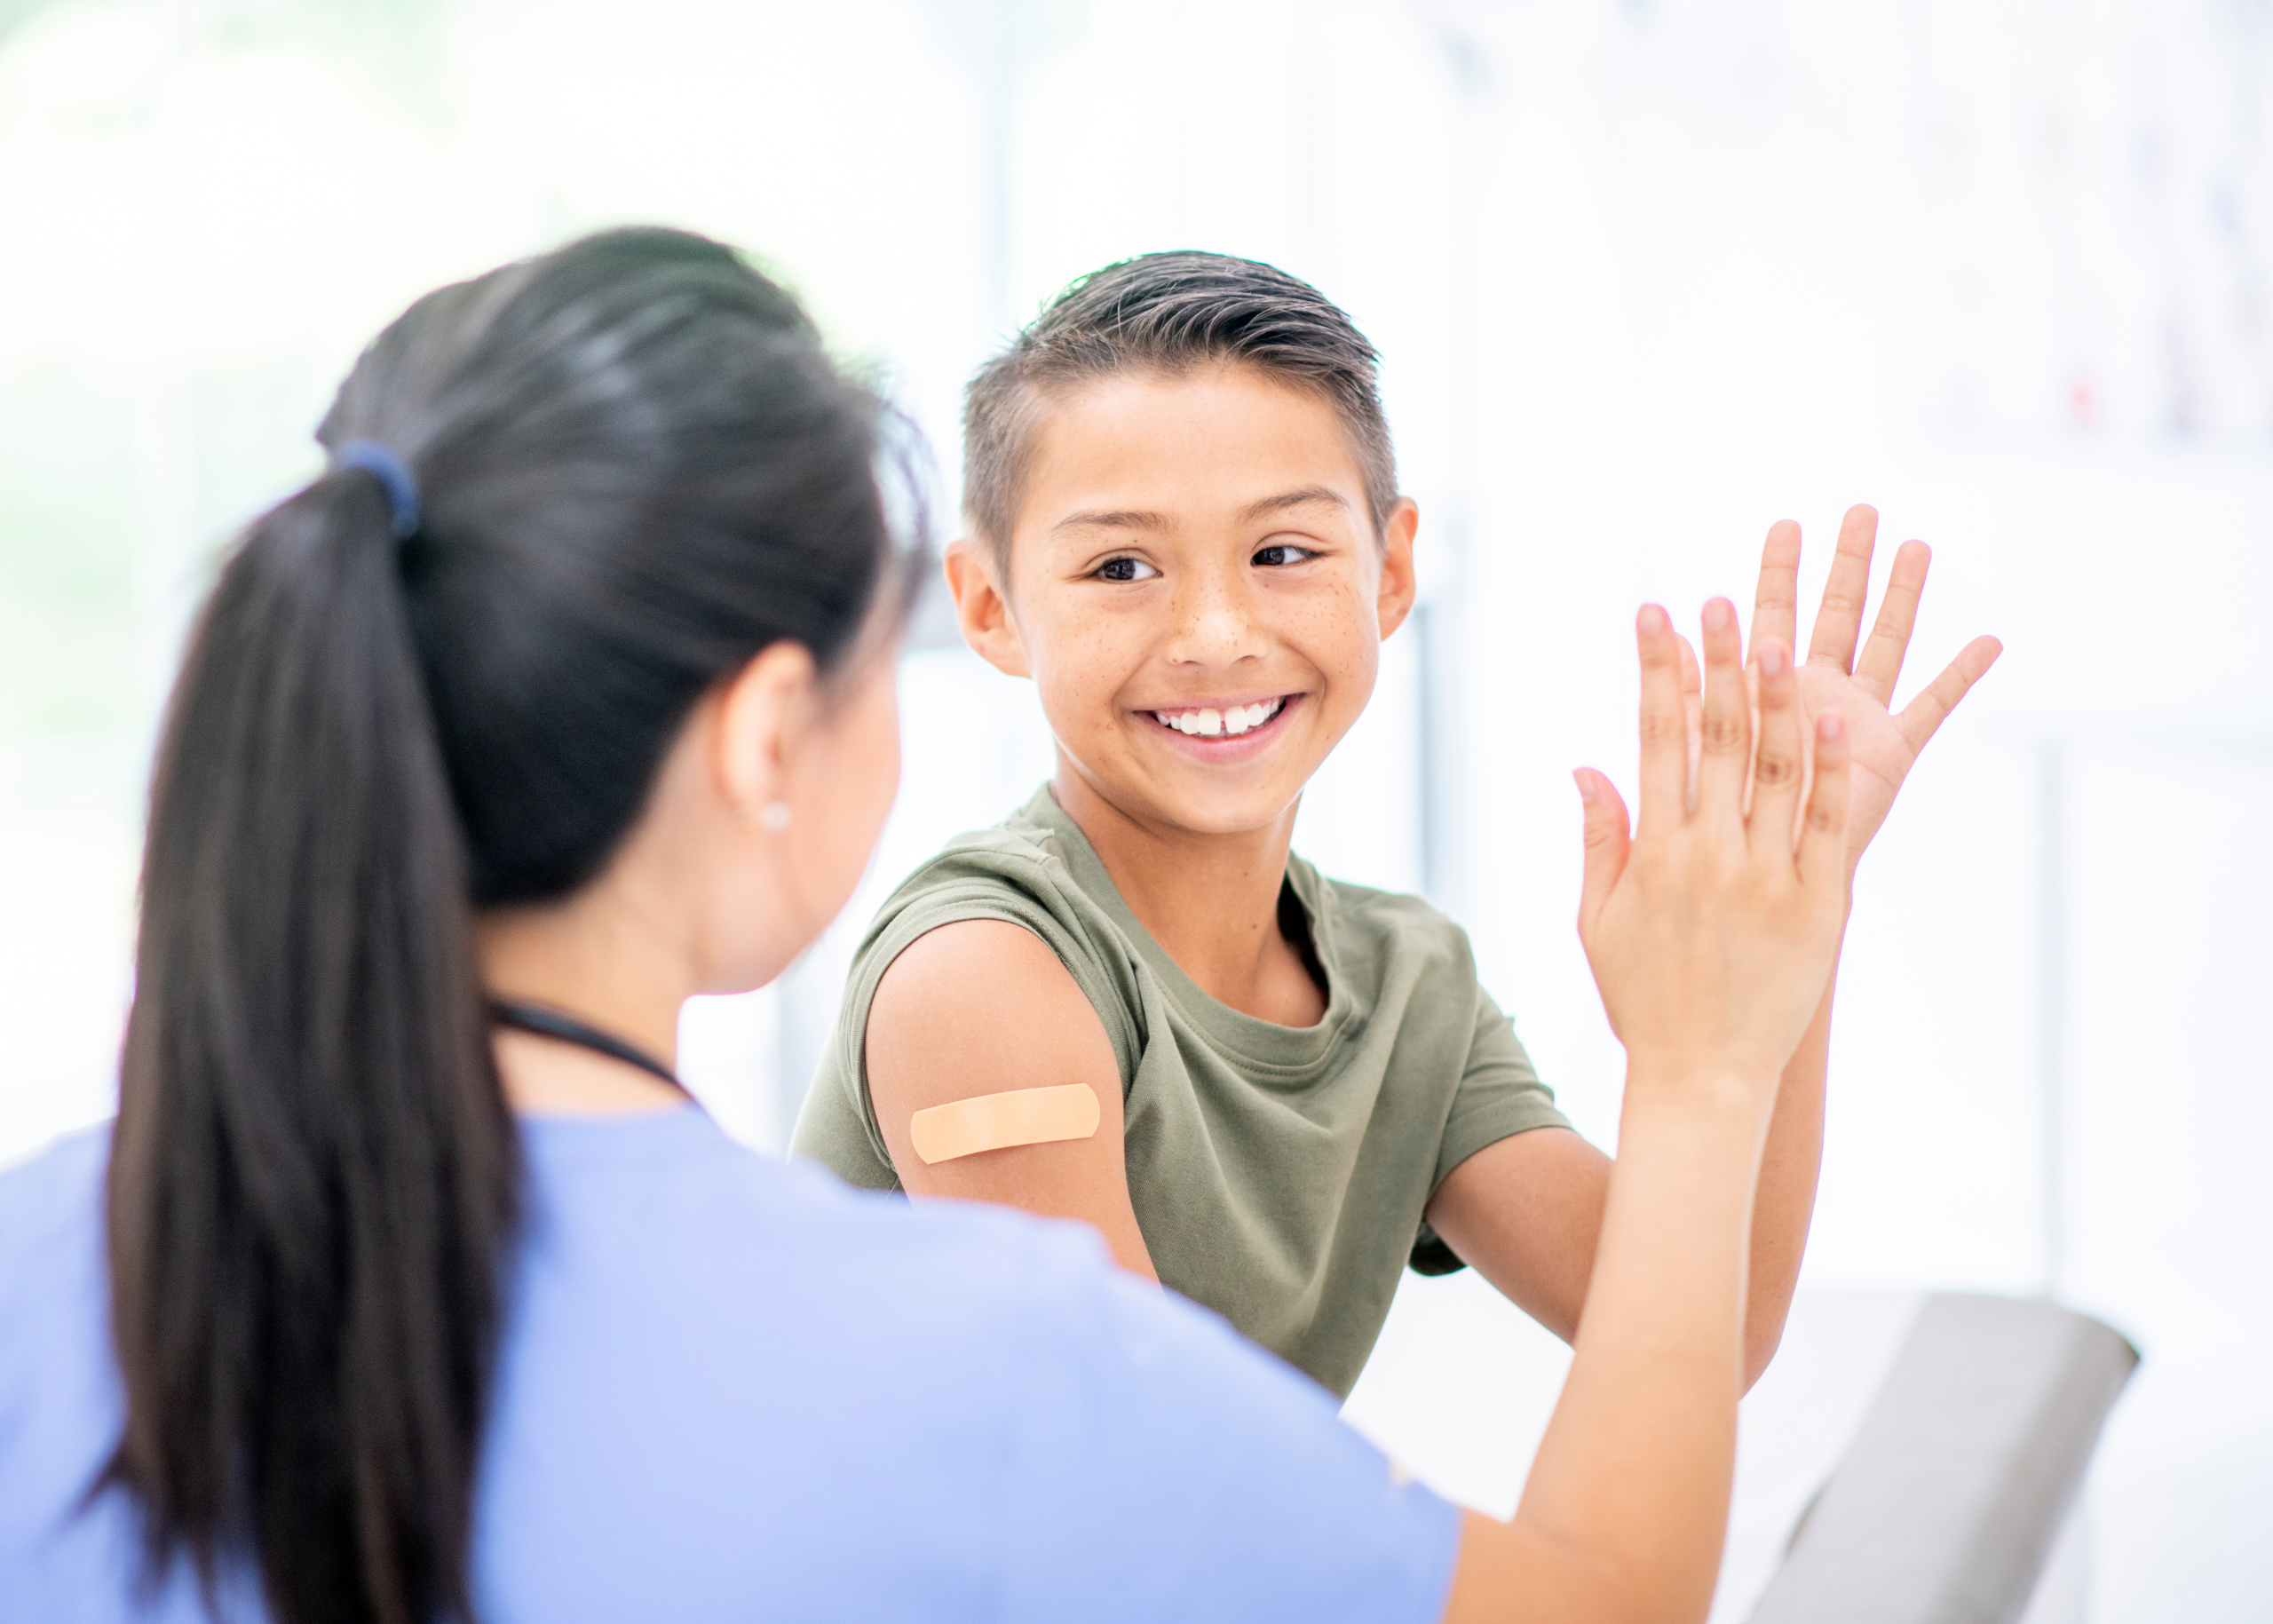 Immunization is the Best Way to Protect Our Children